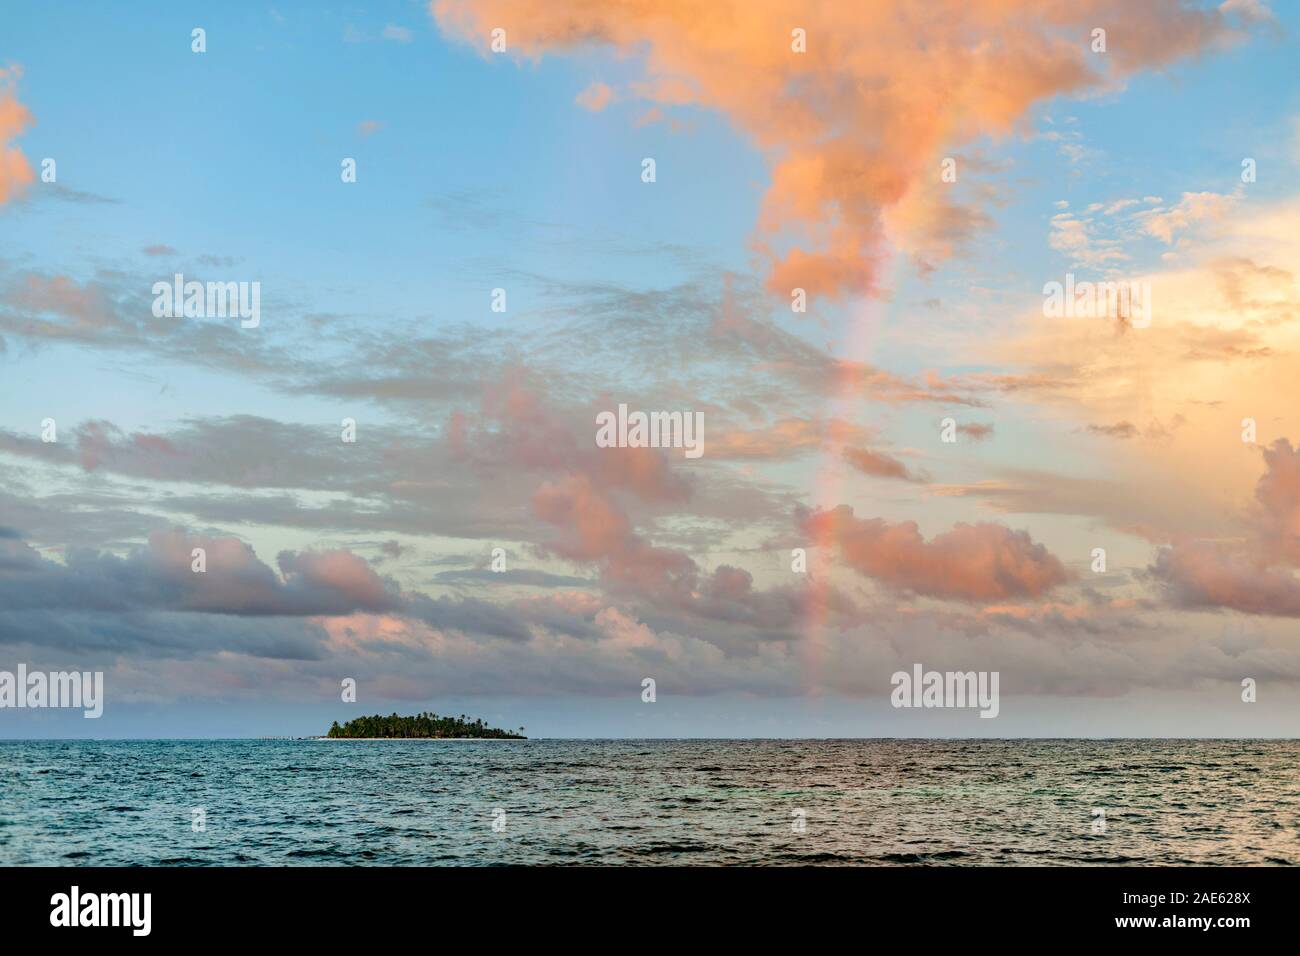 A rainbow and Islote sucre (Sucre islet) off the coast of the island of San Andres, Colombia. Stock Photo